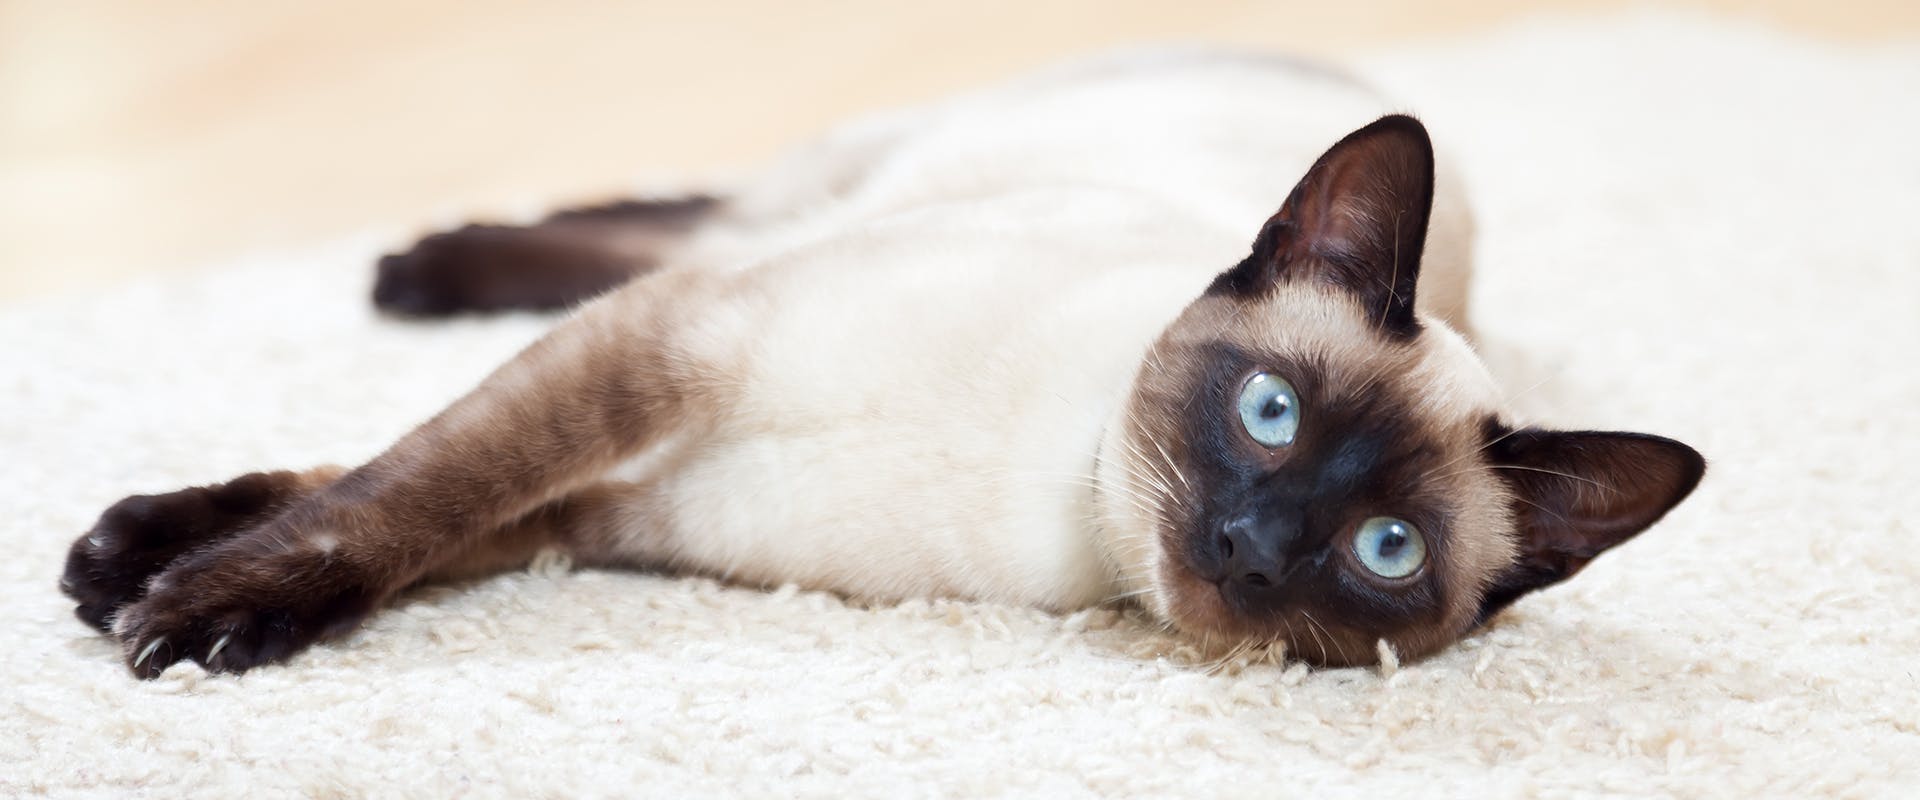 A Siamese cat laying on a carpet